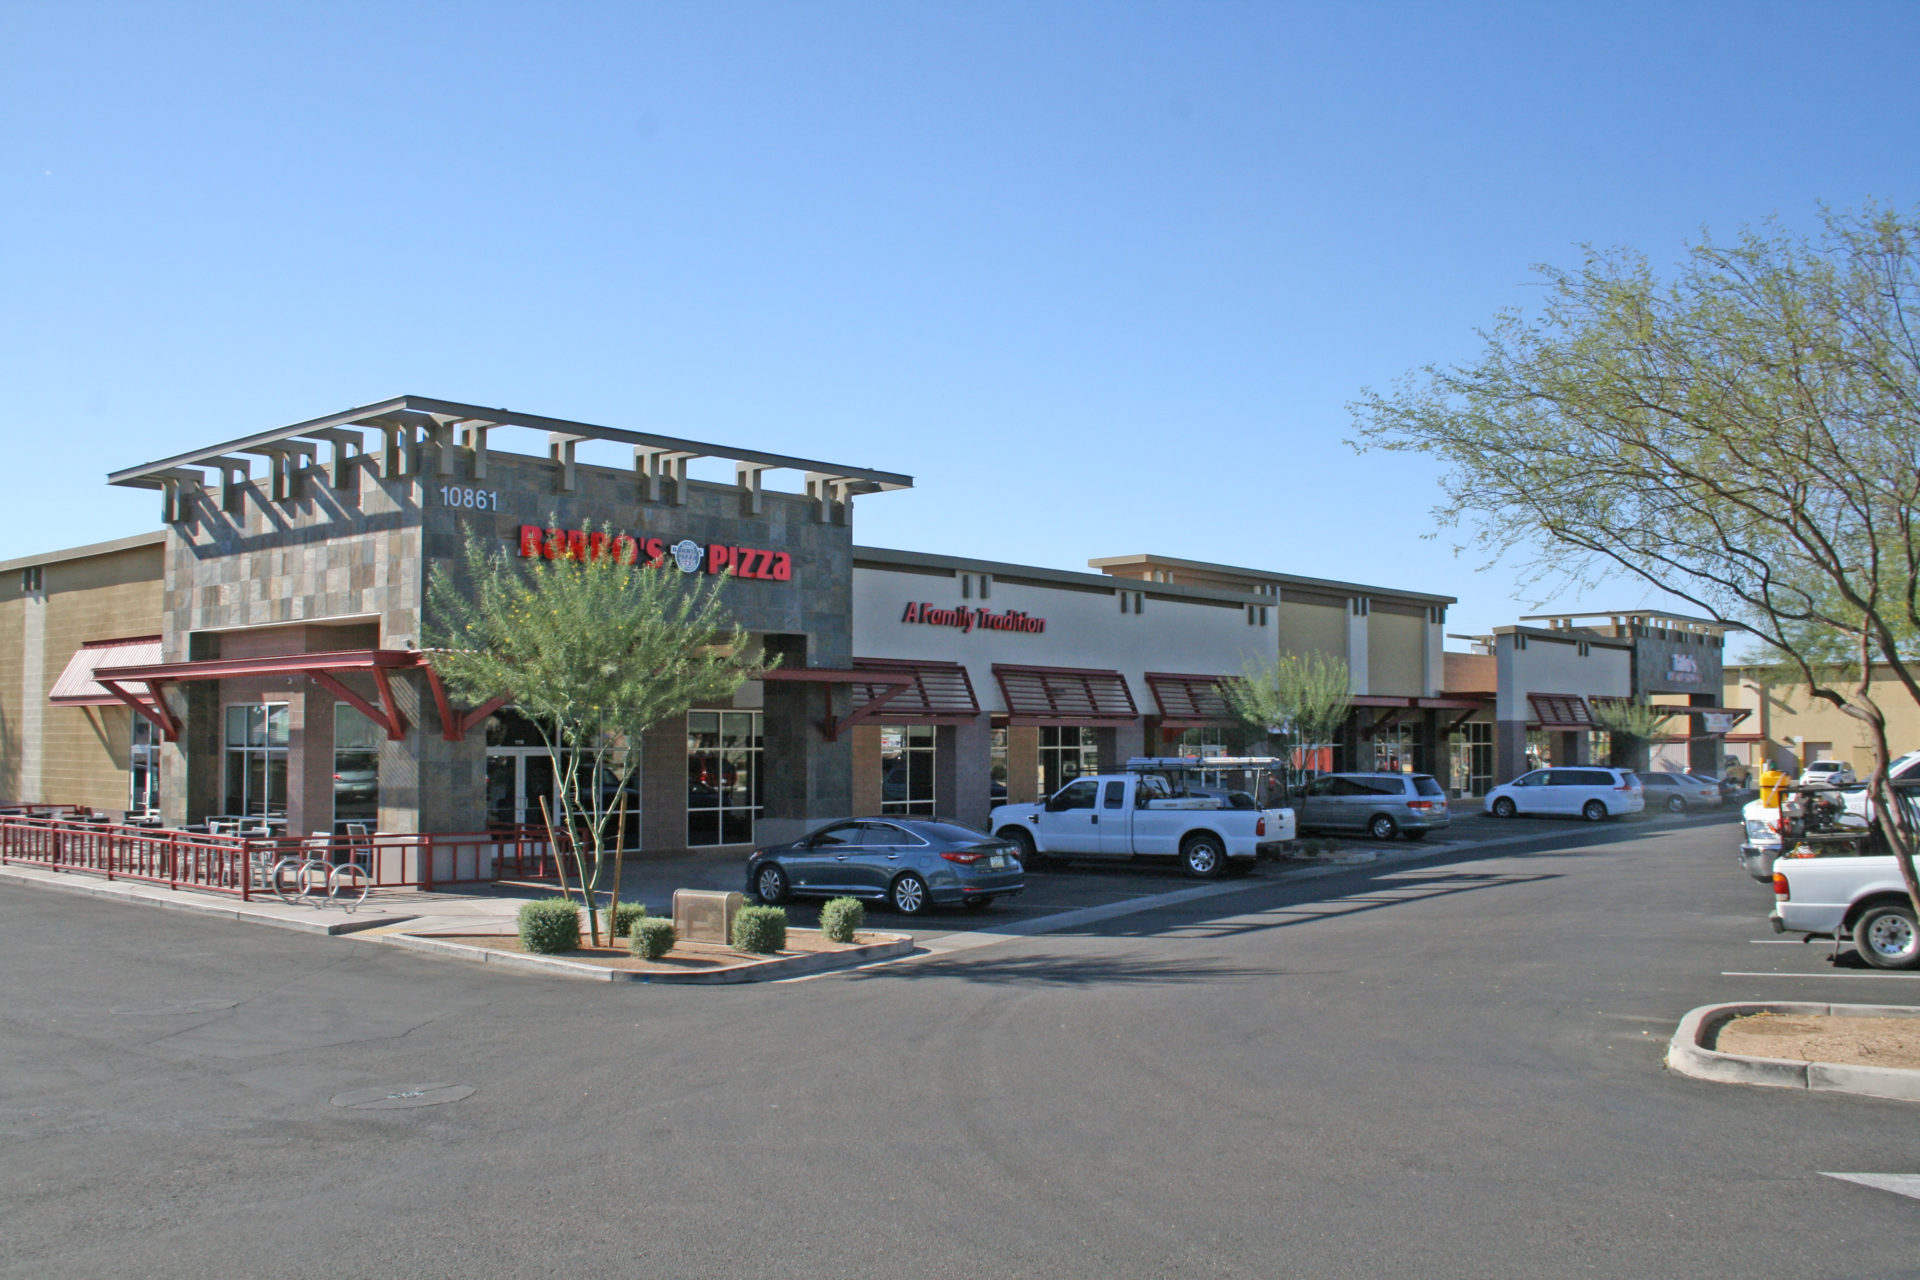 A street view of several businesses in the middle of a parking lot.